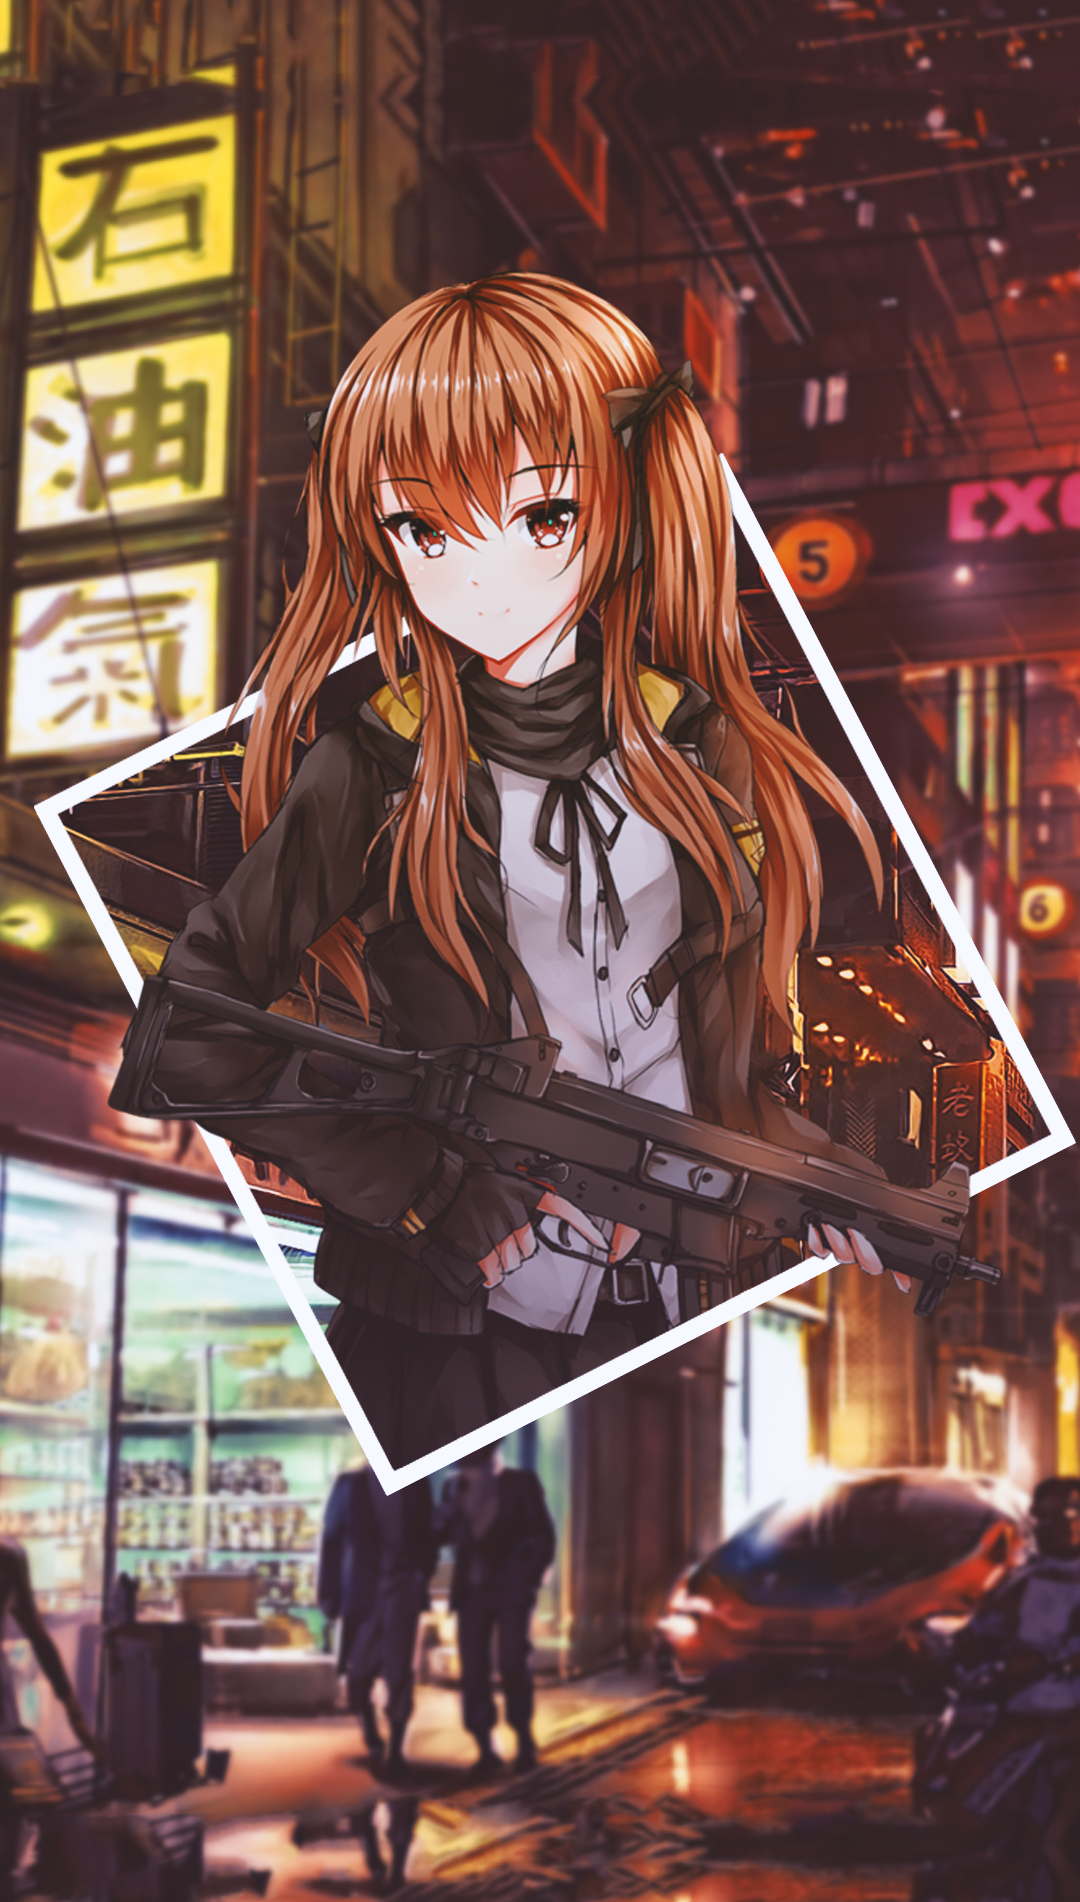 Anime 1080x1902 anime anime girls picture-in-picture gun